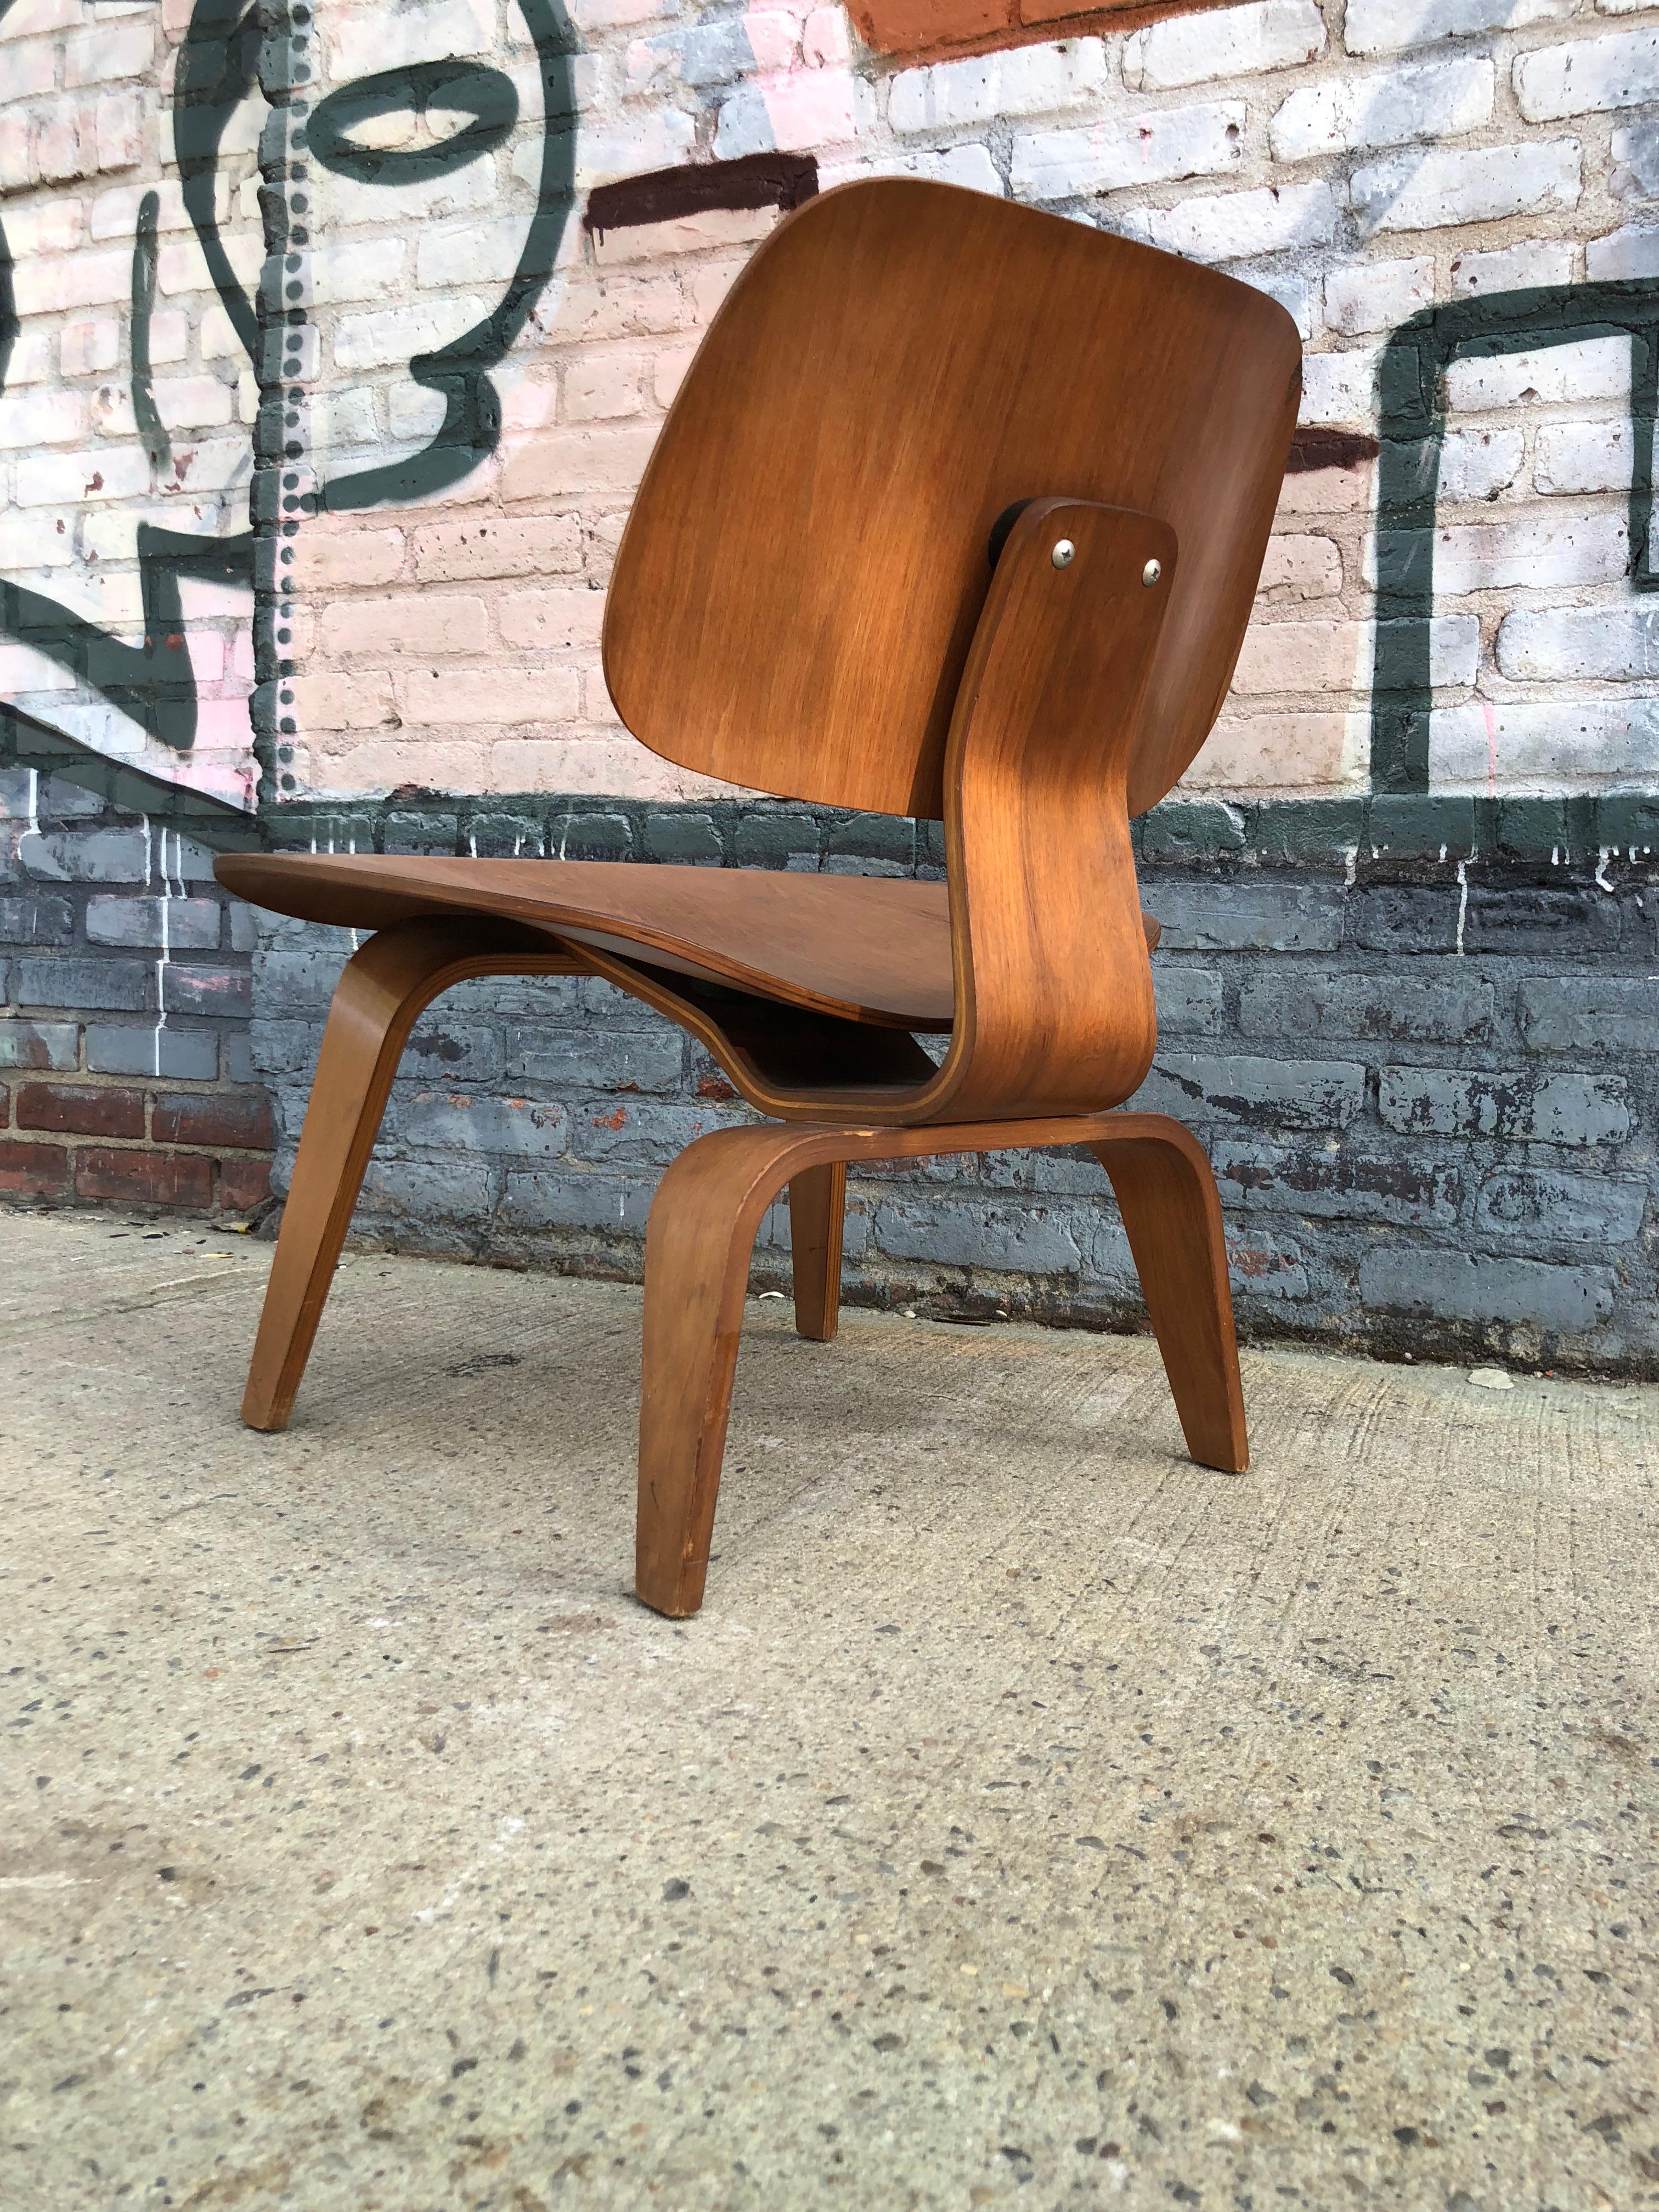 Eames LCW molded plywood lounge chair for Herman Miller. Gorgeous patina and color to the wood. Fit for regular use. Normal wear. Original back mount still very flexible with no hardness or dryness to the rubber Stamped LCW, dating to early